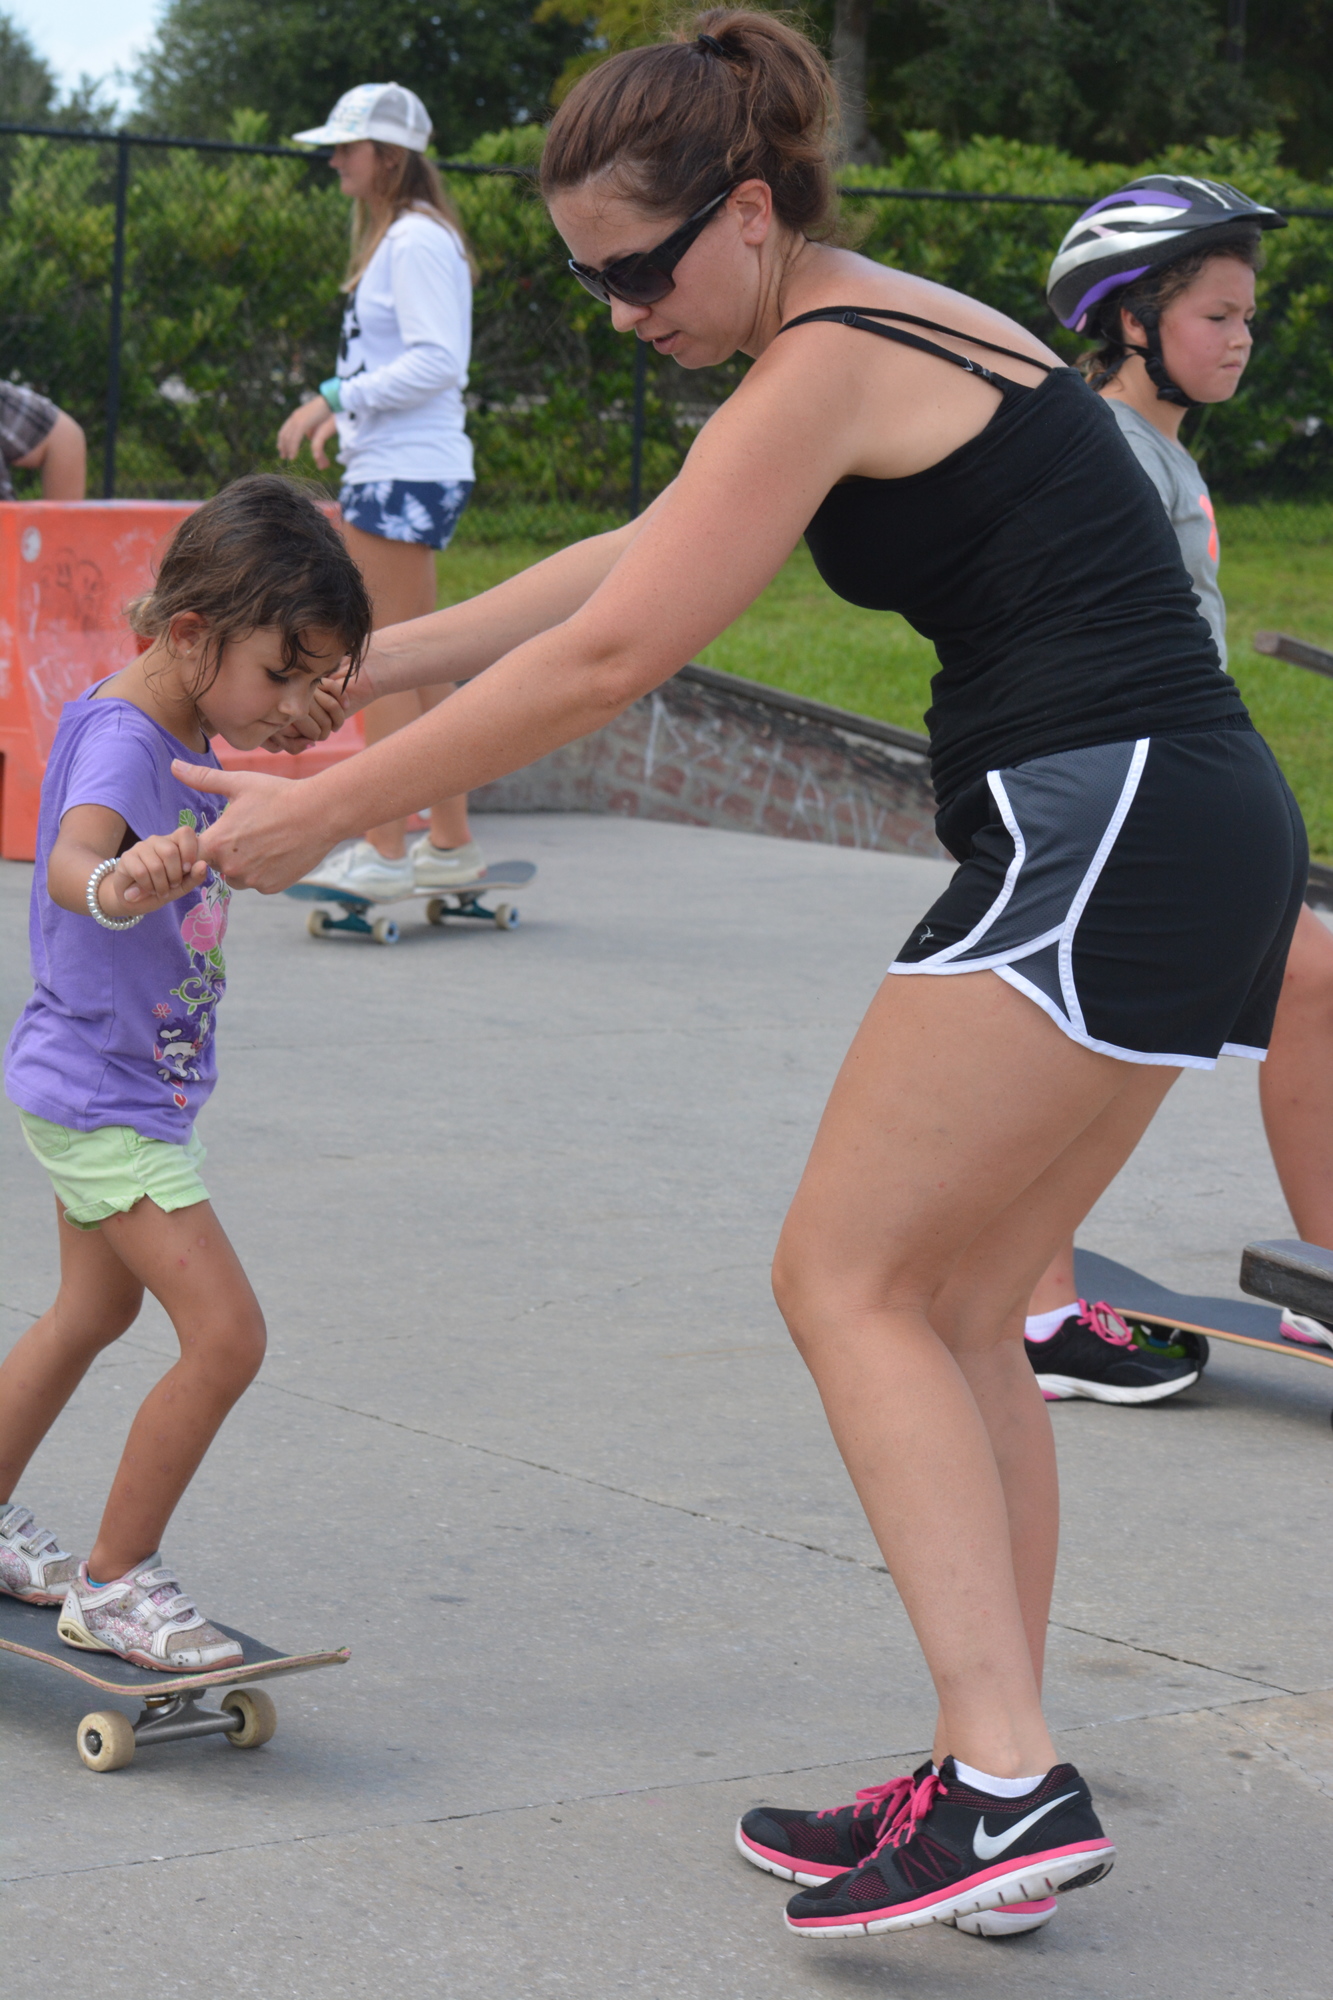 Annika Lemon and mom Amy Lemon learn to stay upright at Payne Park's Skate Rising event.